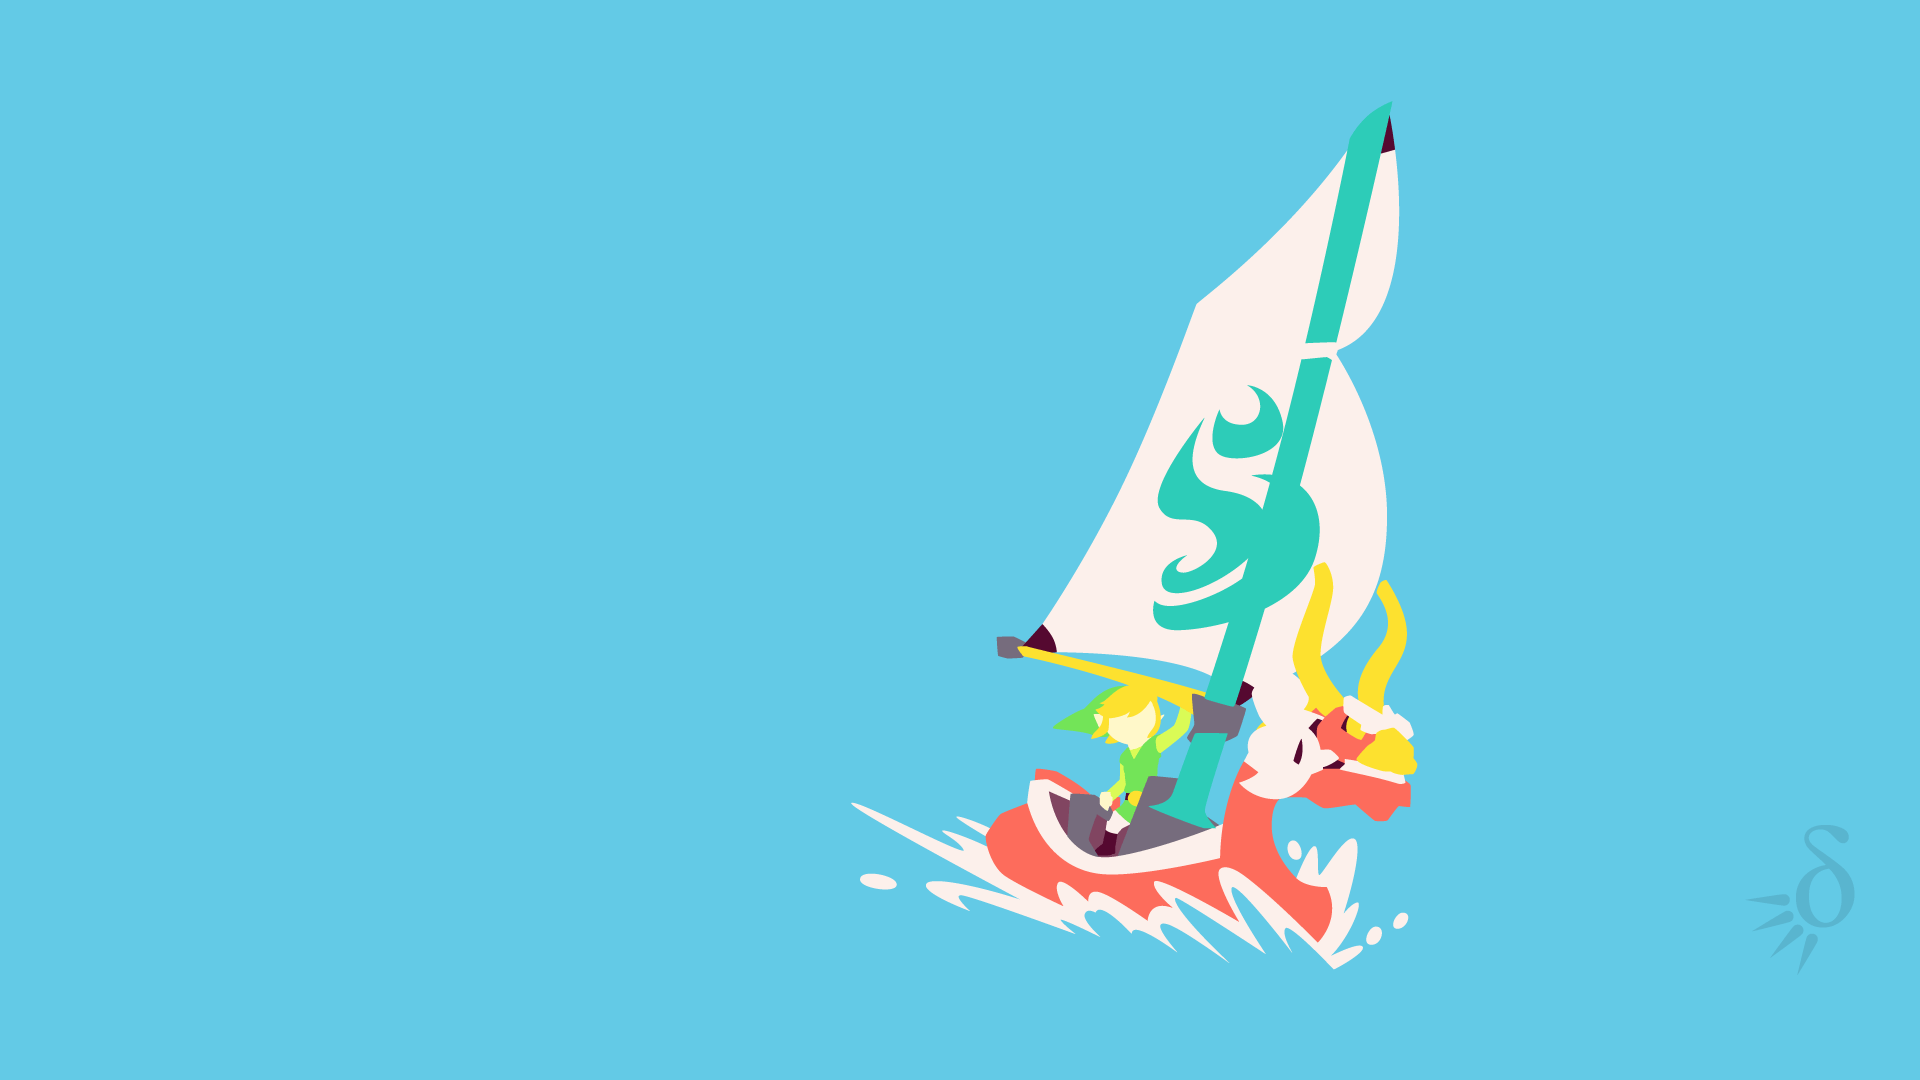 More Like Wind Waker of Red Lions Sailing